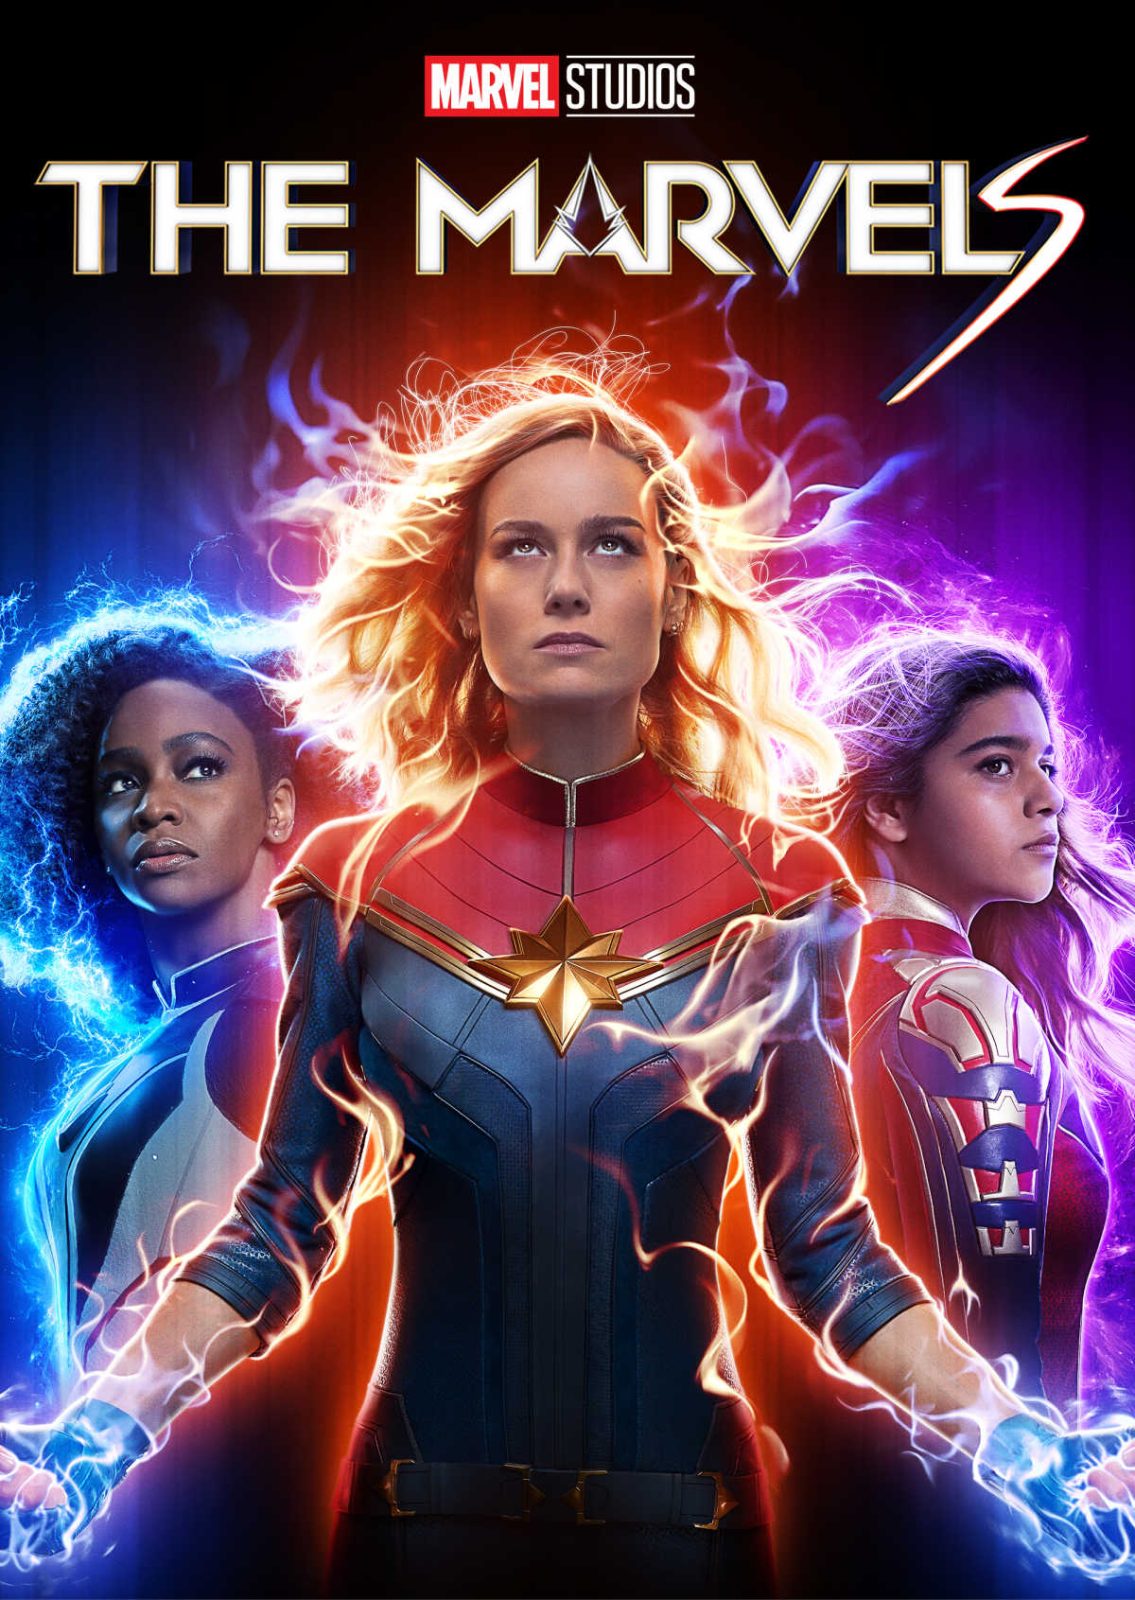 Prepare for cosmic thrills, side-splitting laughs, and heartwarming moments in The Marvels! The film explodes with epic action, witty humor, and an unbreakable bond of sisterhood. Buckle up for a journey beyond infinity and dive into this must-see superhero adventure. 